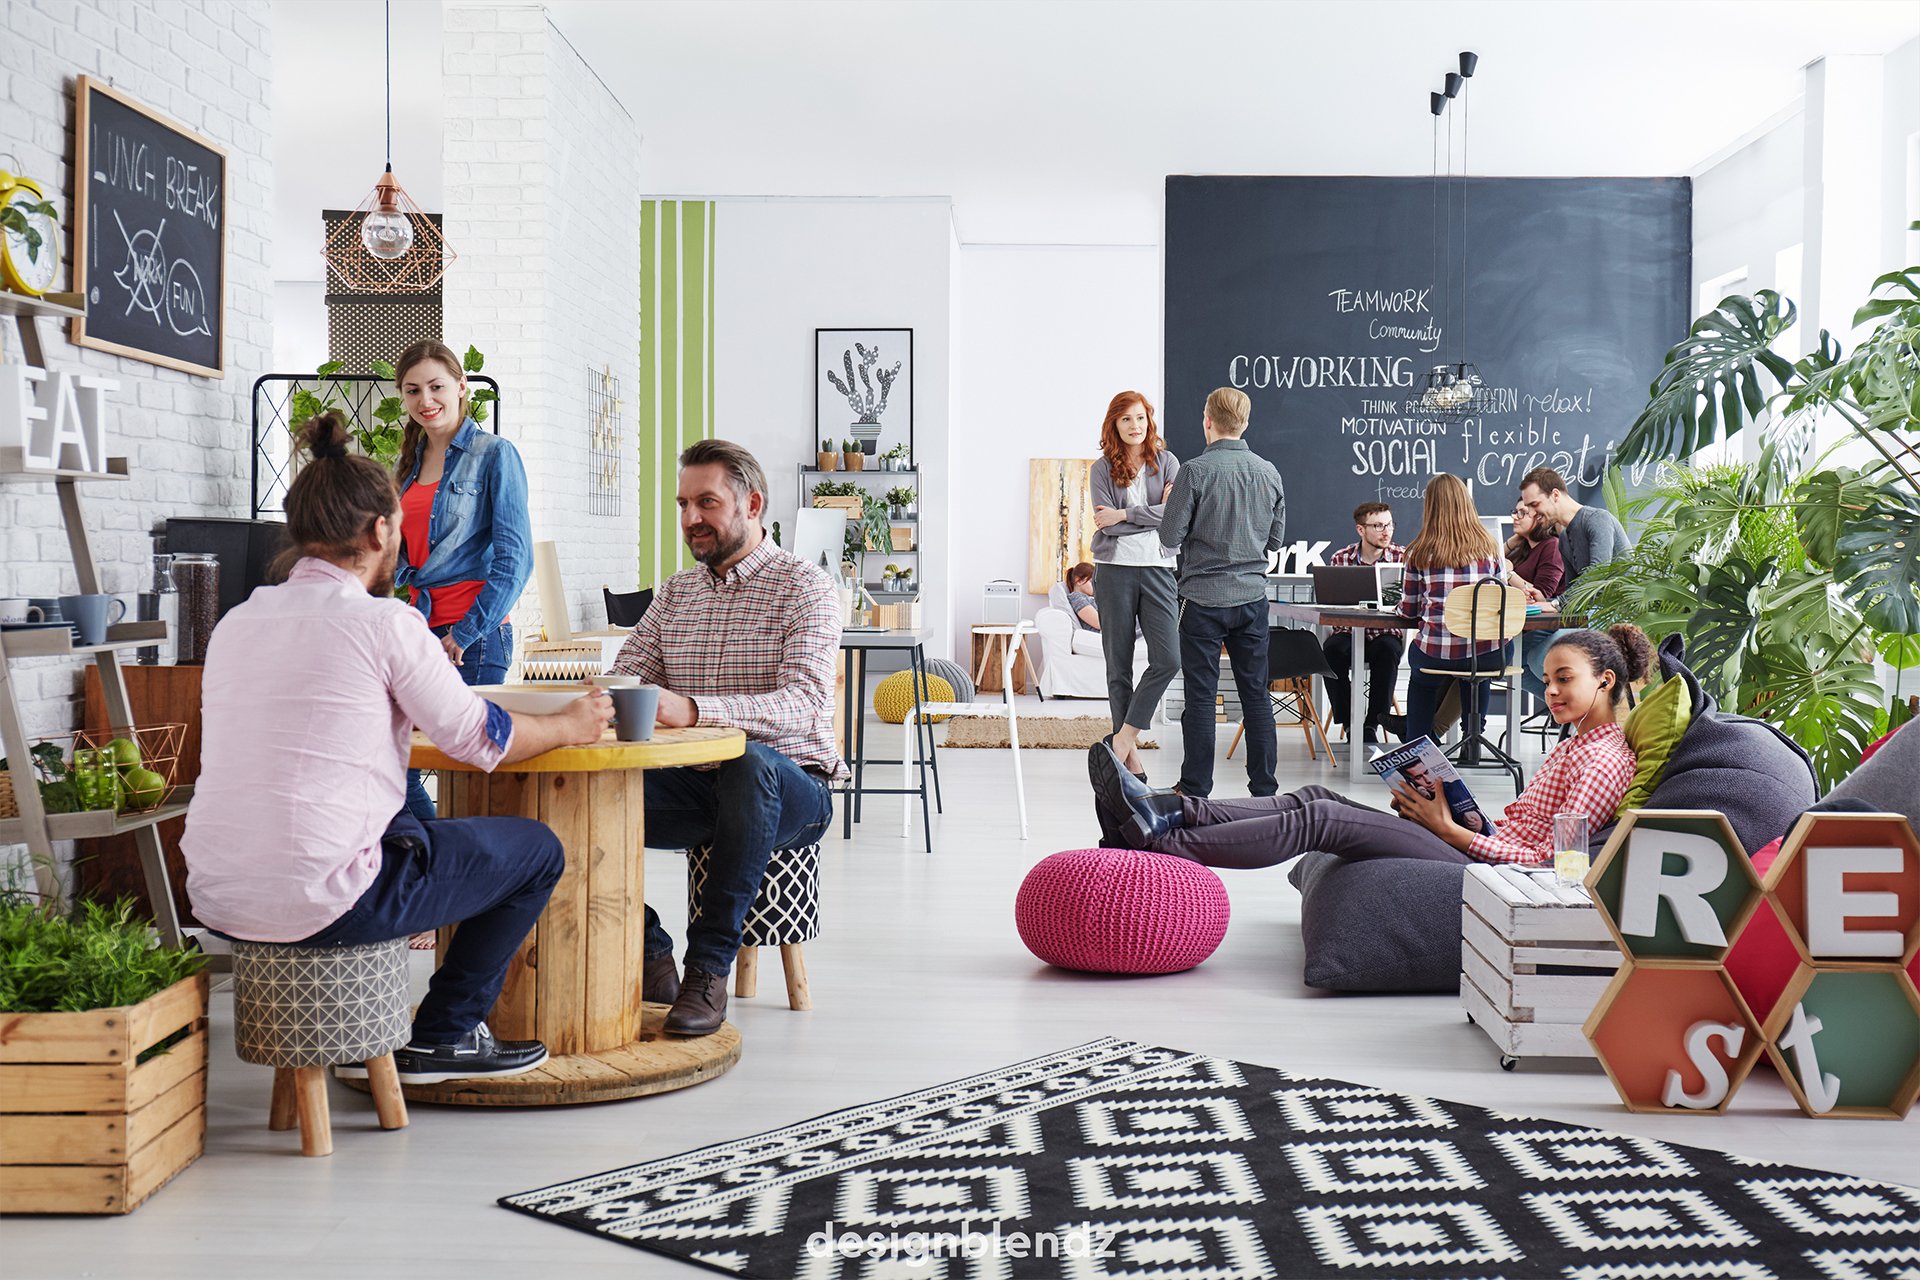 The Rise of Co-Working Spaces: Impact on Traditional Corporate Office Design